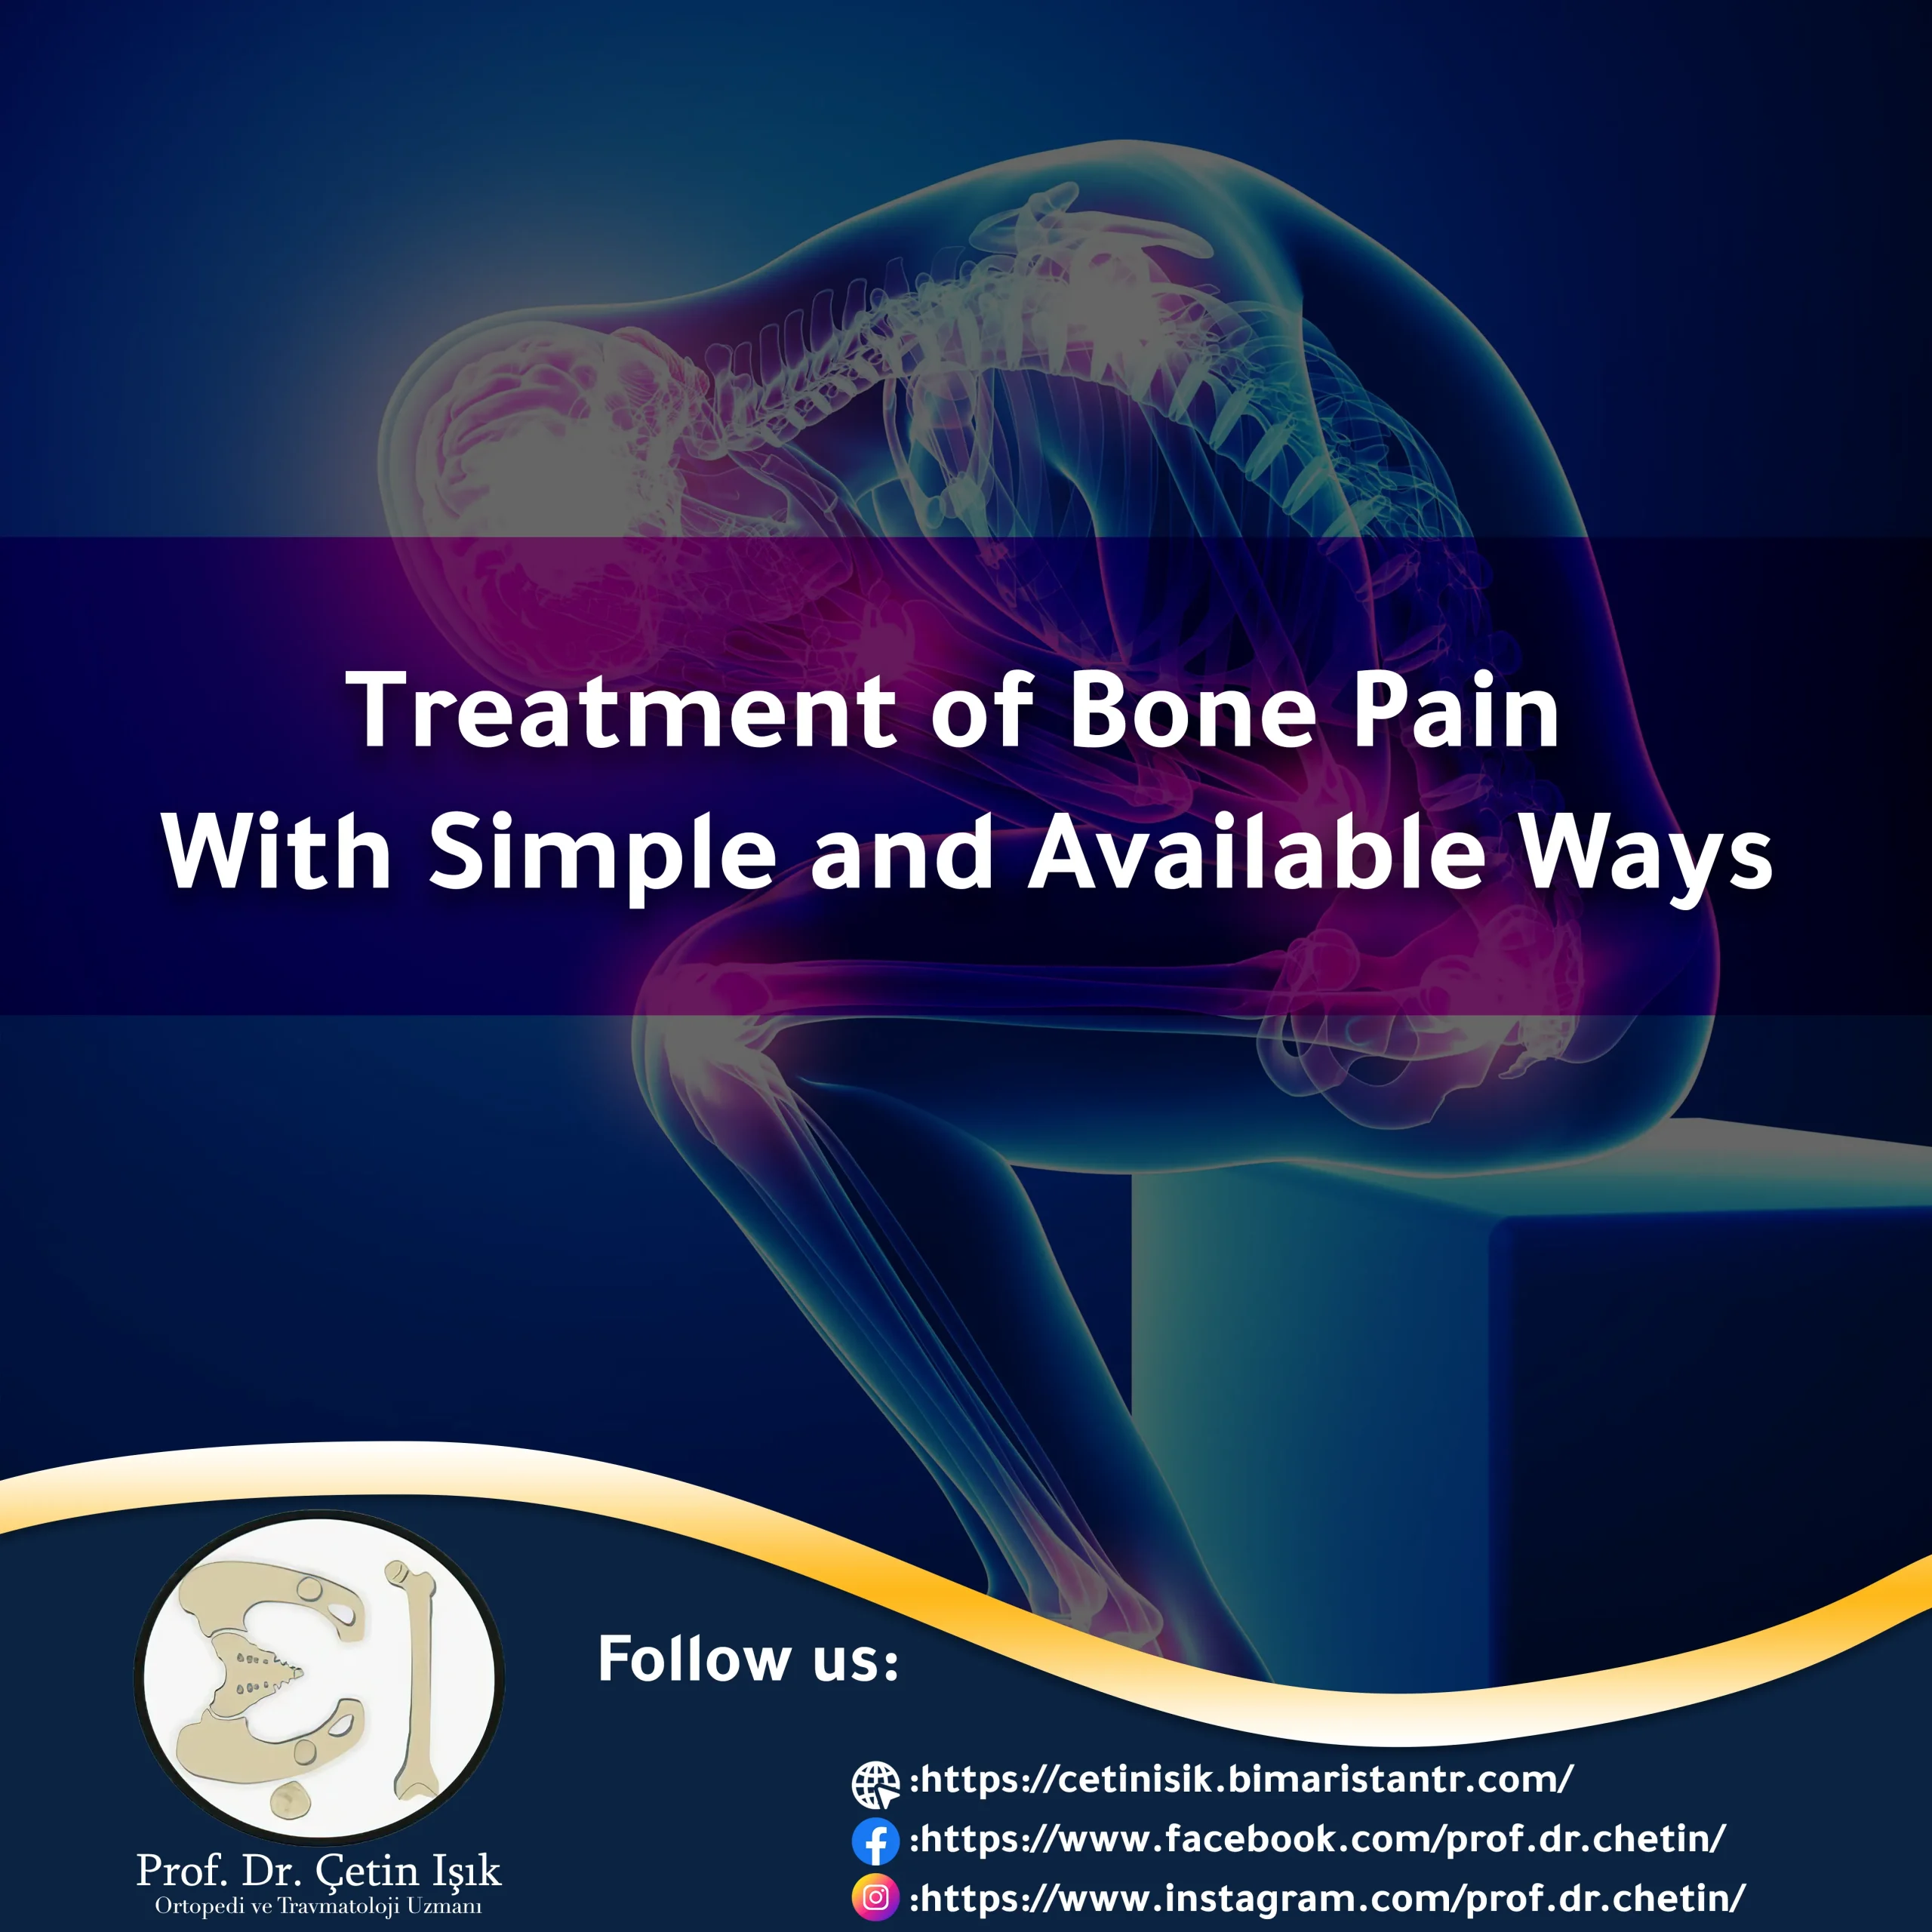 Treatment of Bone Pain With Simple and Available Ways